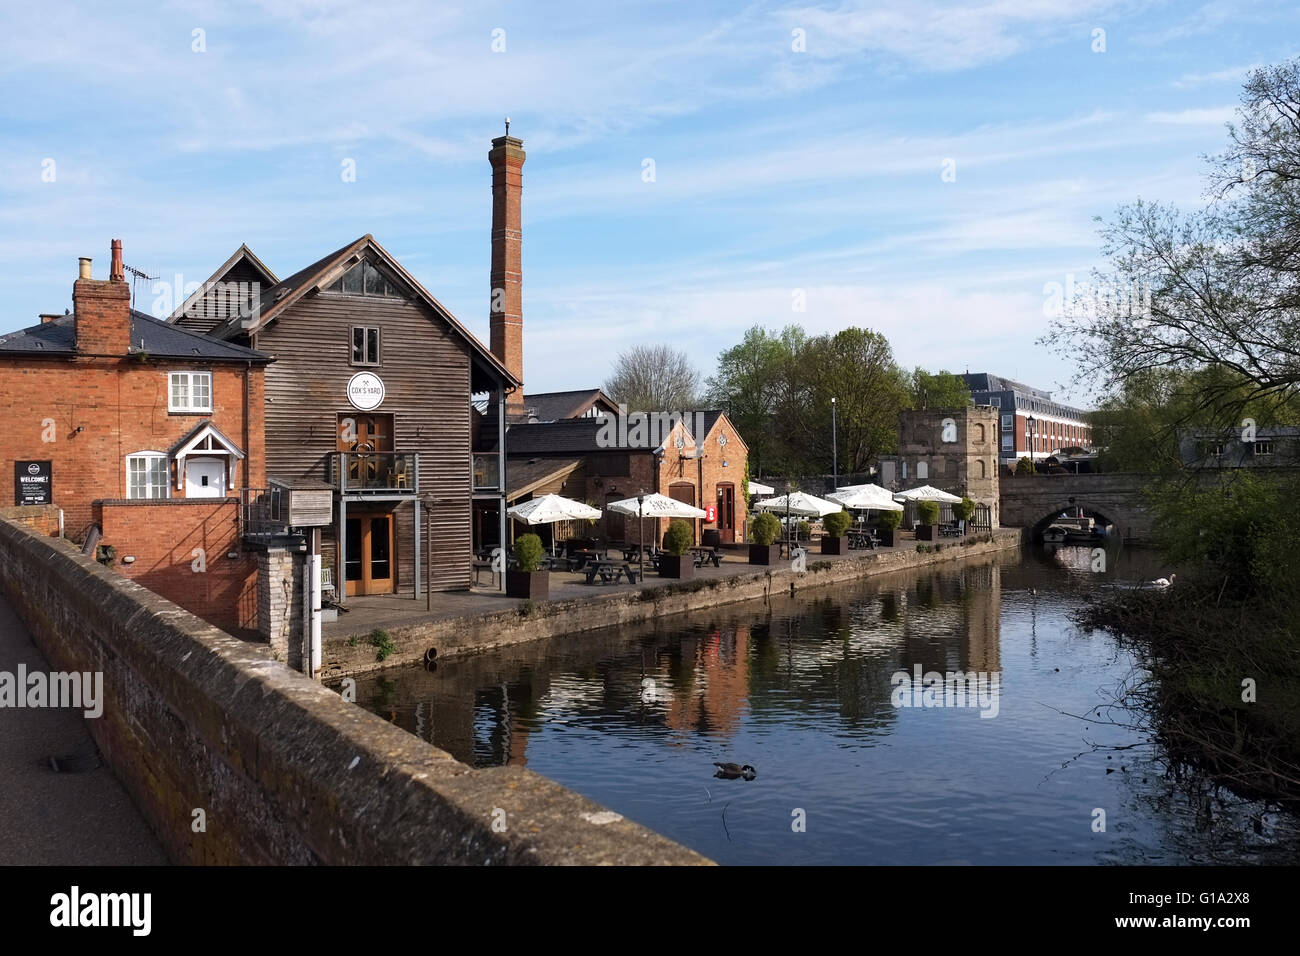 View of Cox's Yard from the Tramway Bridge on the River Avon, at Stratford-upon-Avon, Warwickshire, England, UK. Stock Photo